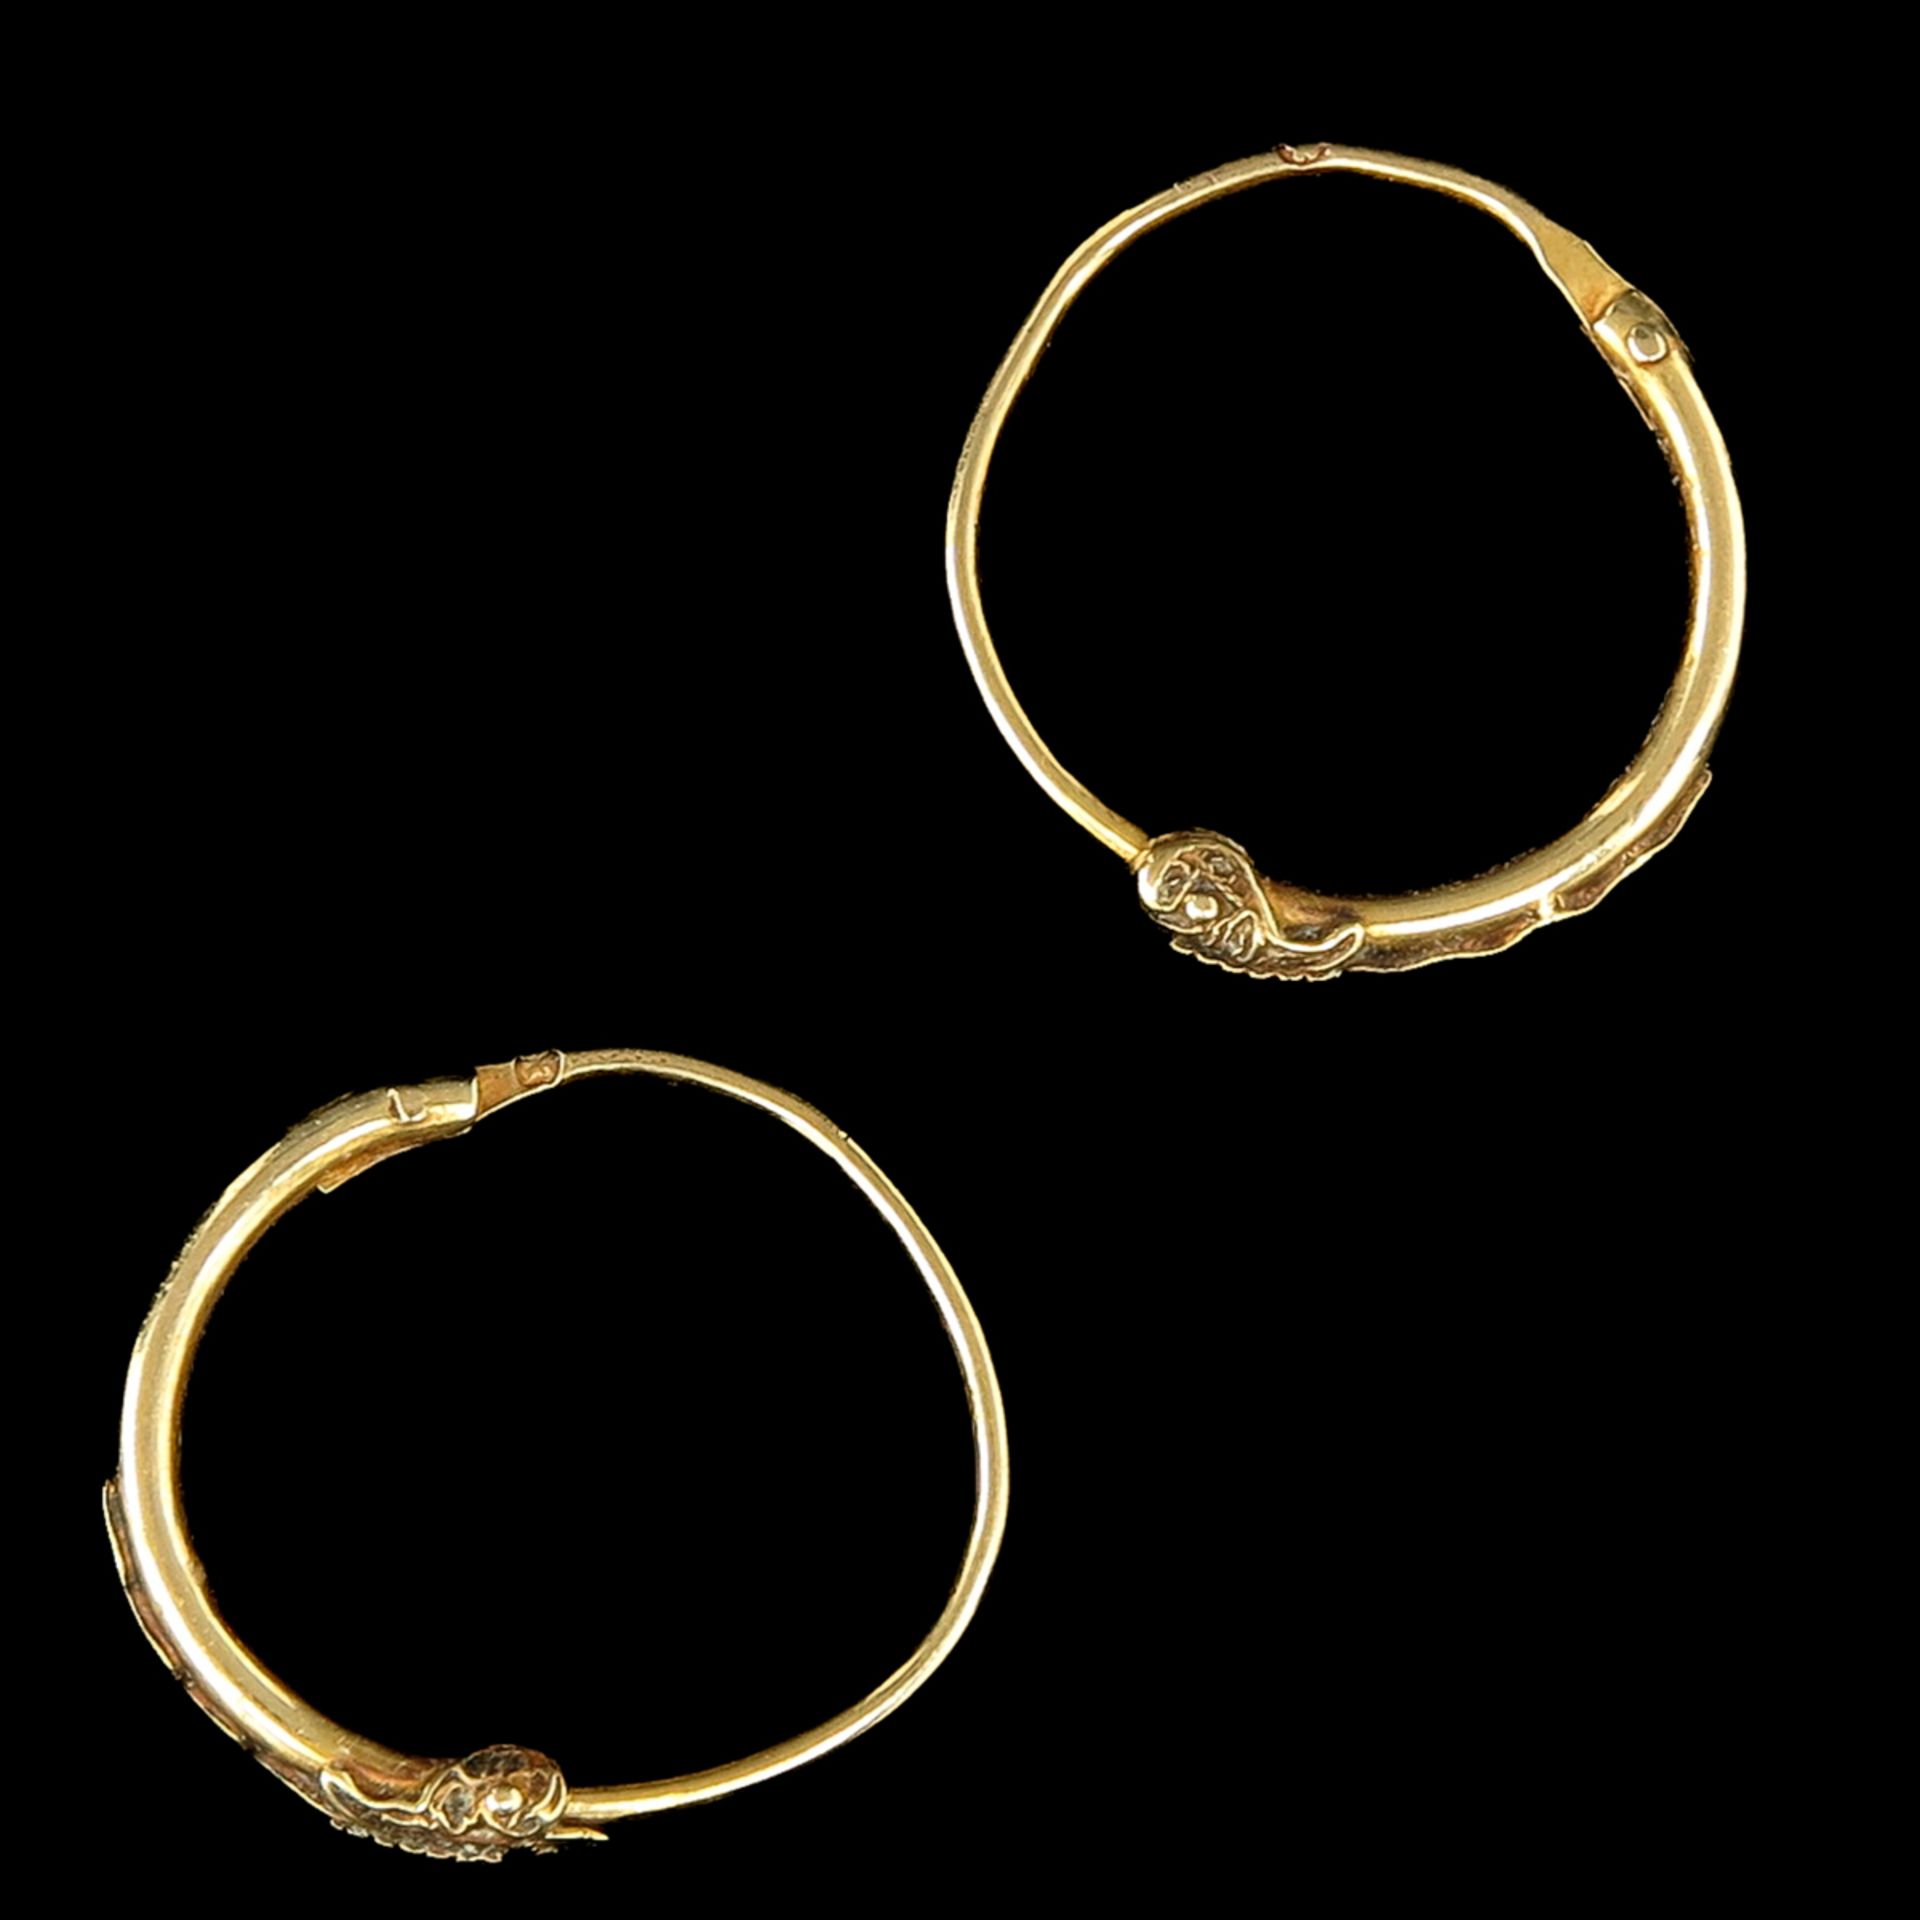 A Pair of 19th Century Fisherman Earrings - Image 2 of 4